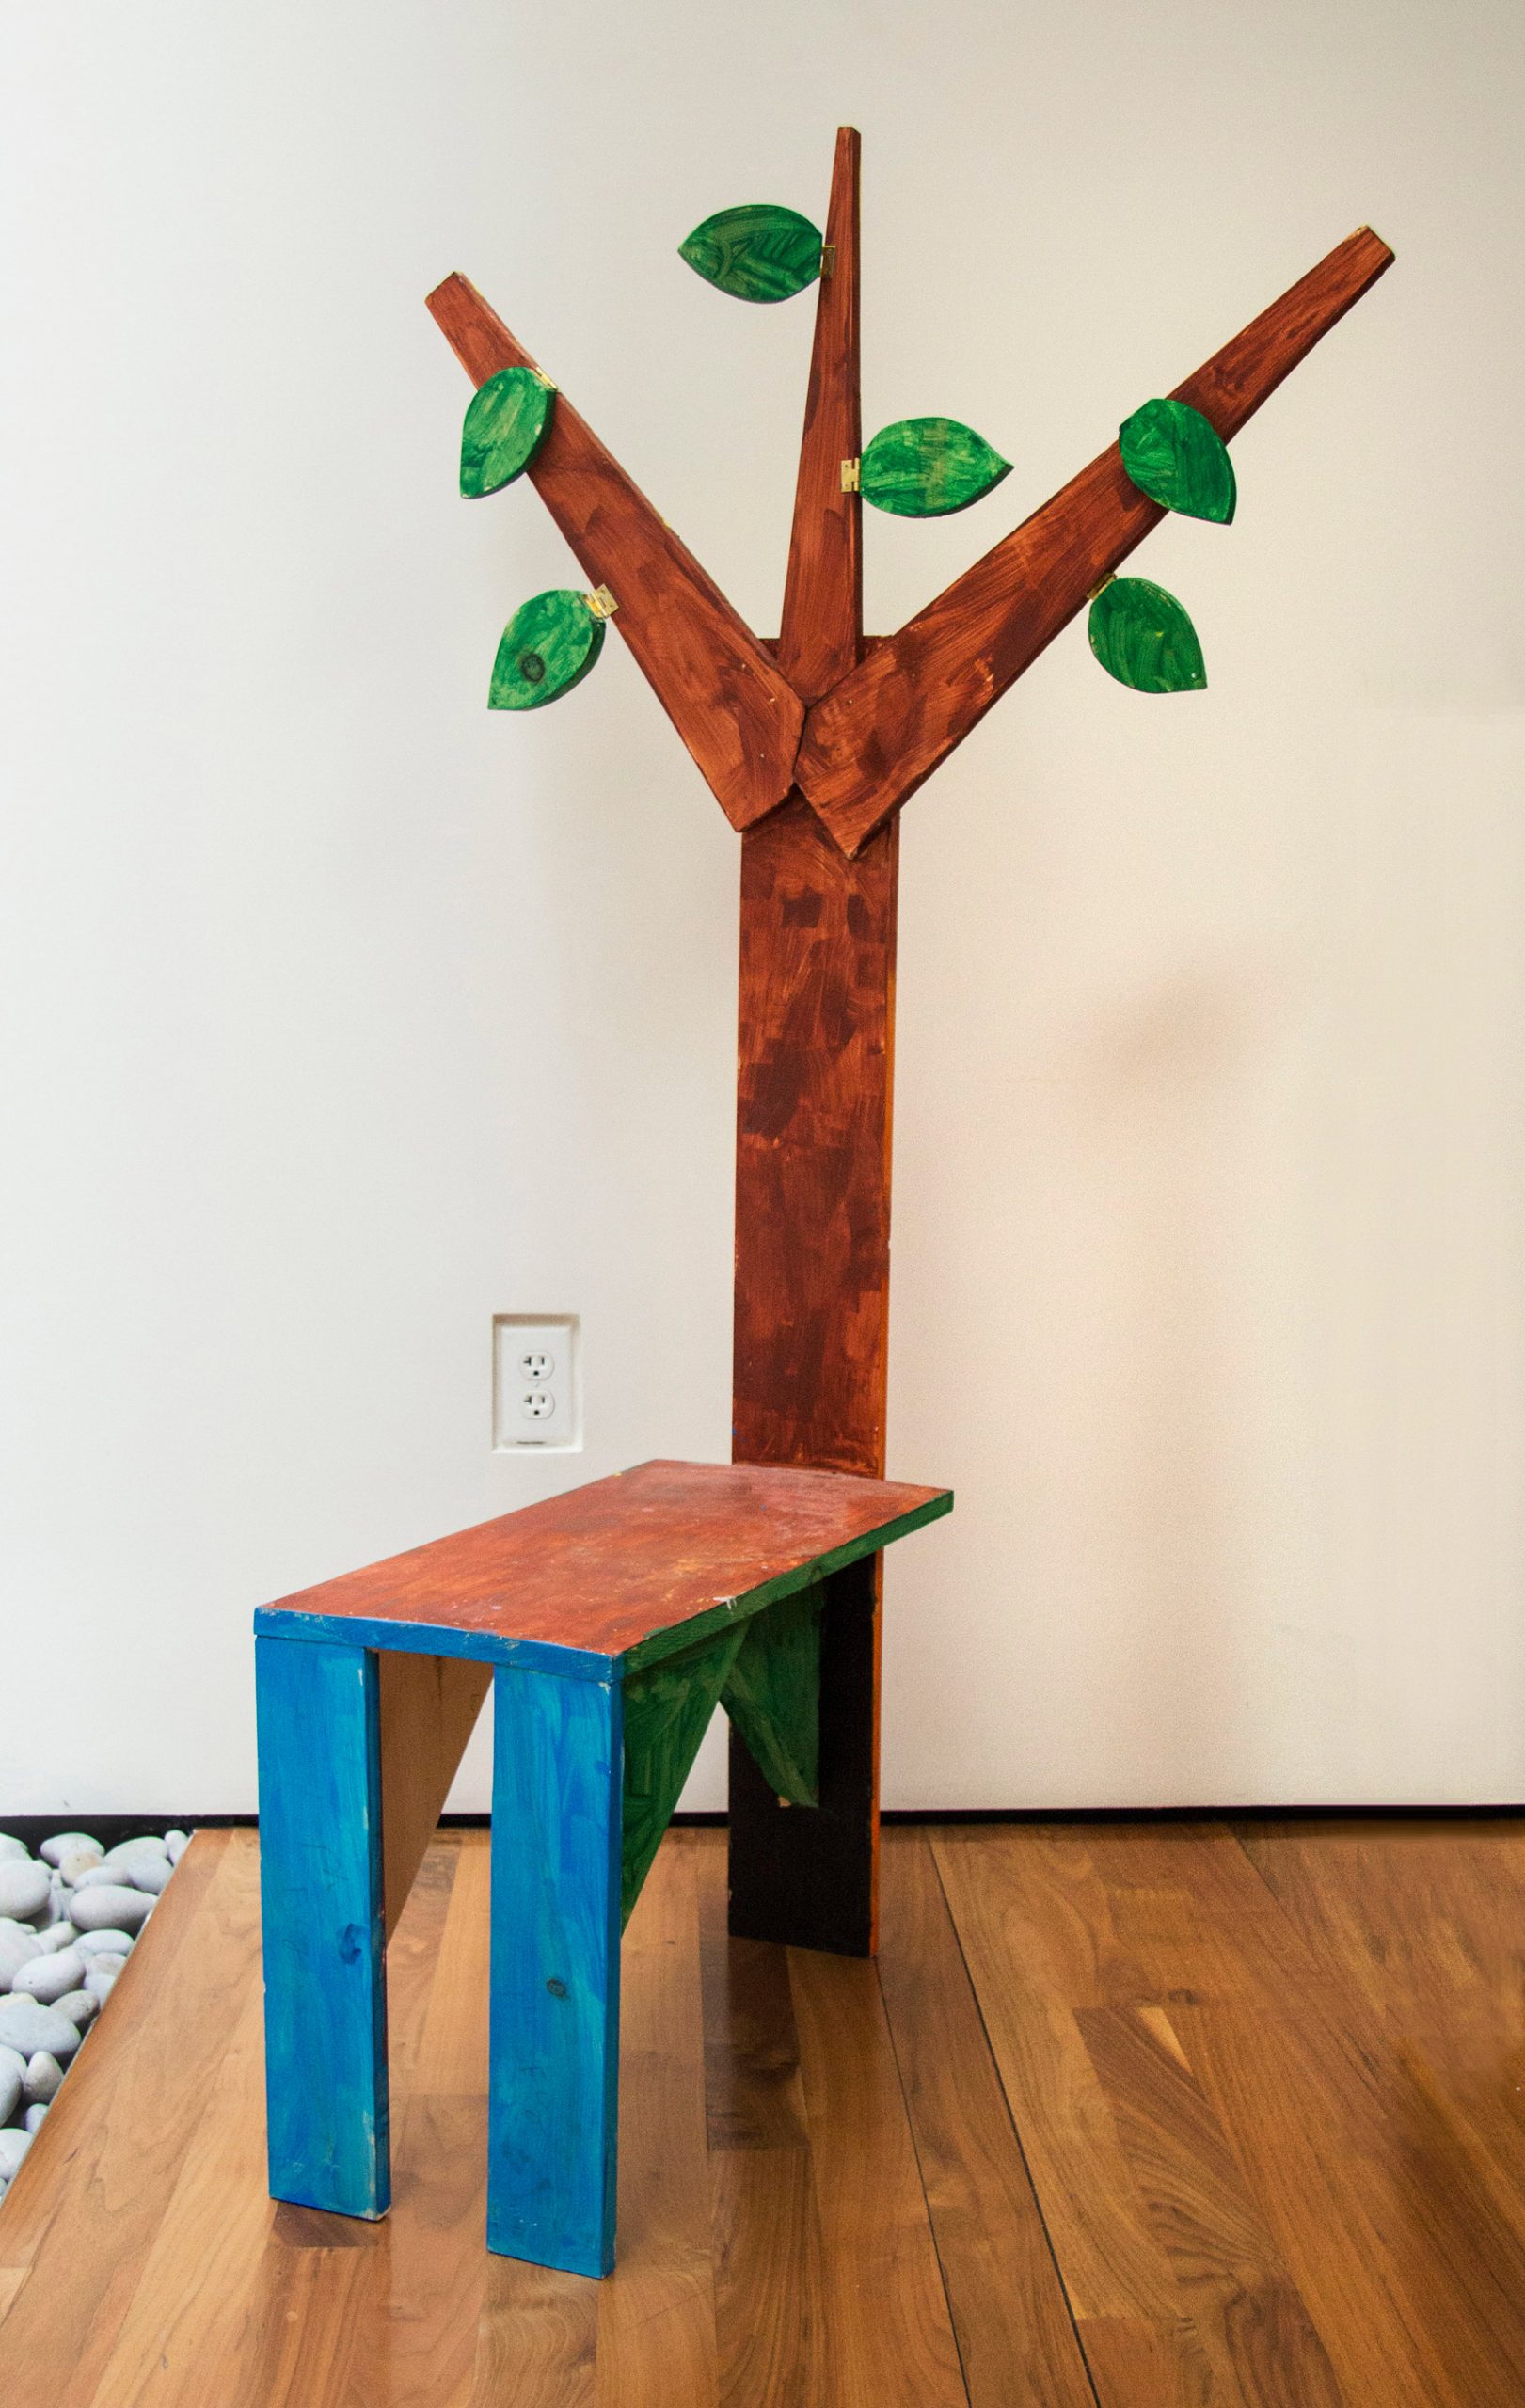 Tree-shaped seating design from Bruce Edelstein's workshop at Trinity School